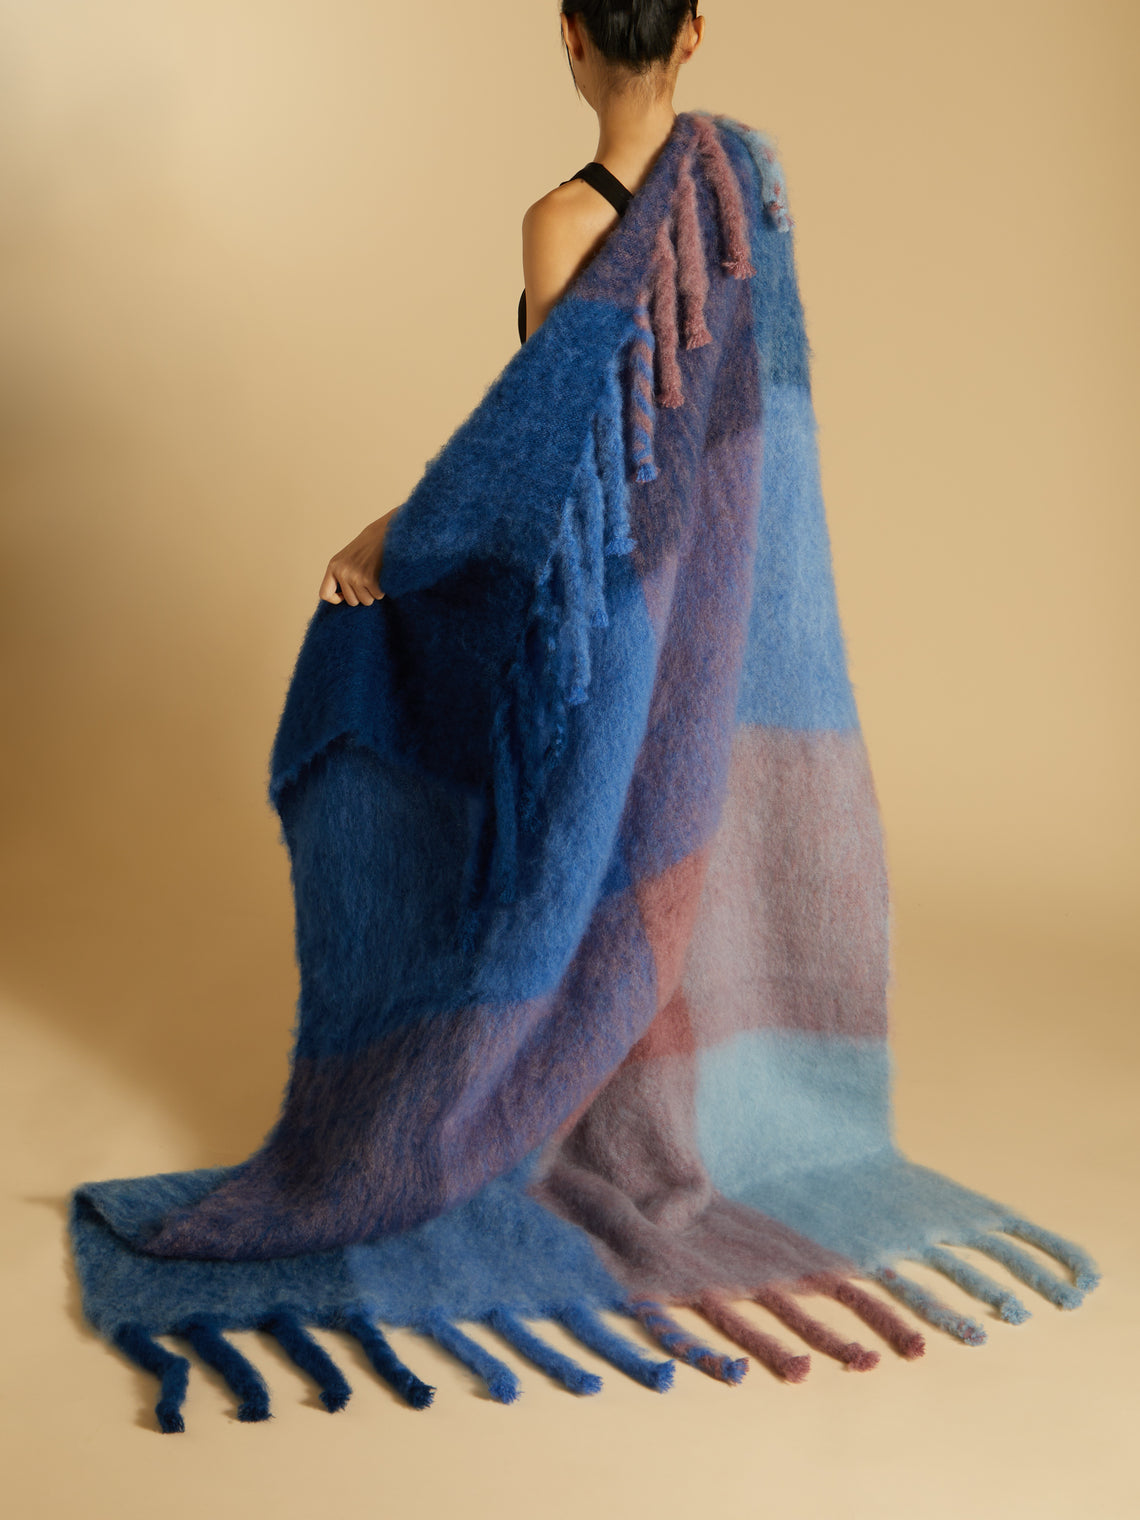 Lena Rewell - Coral Handwoven Mohair Blanket -  - ABASK